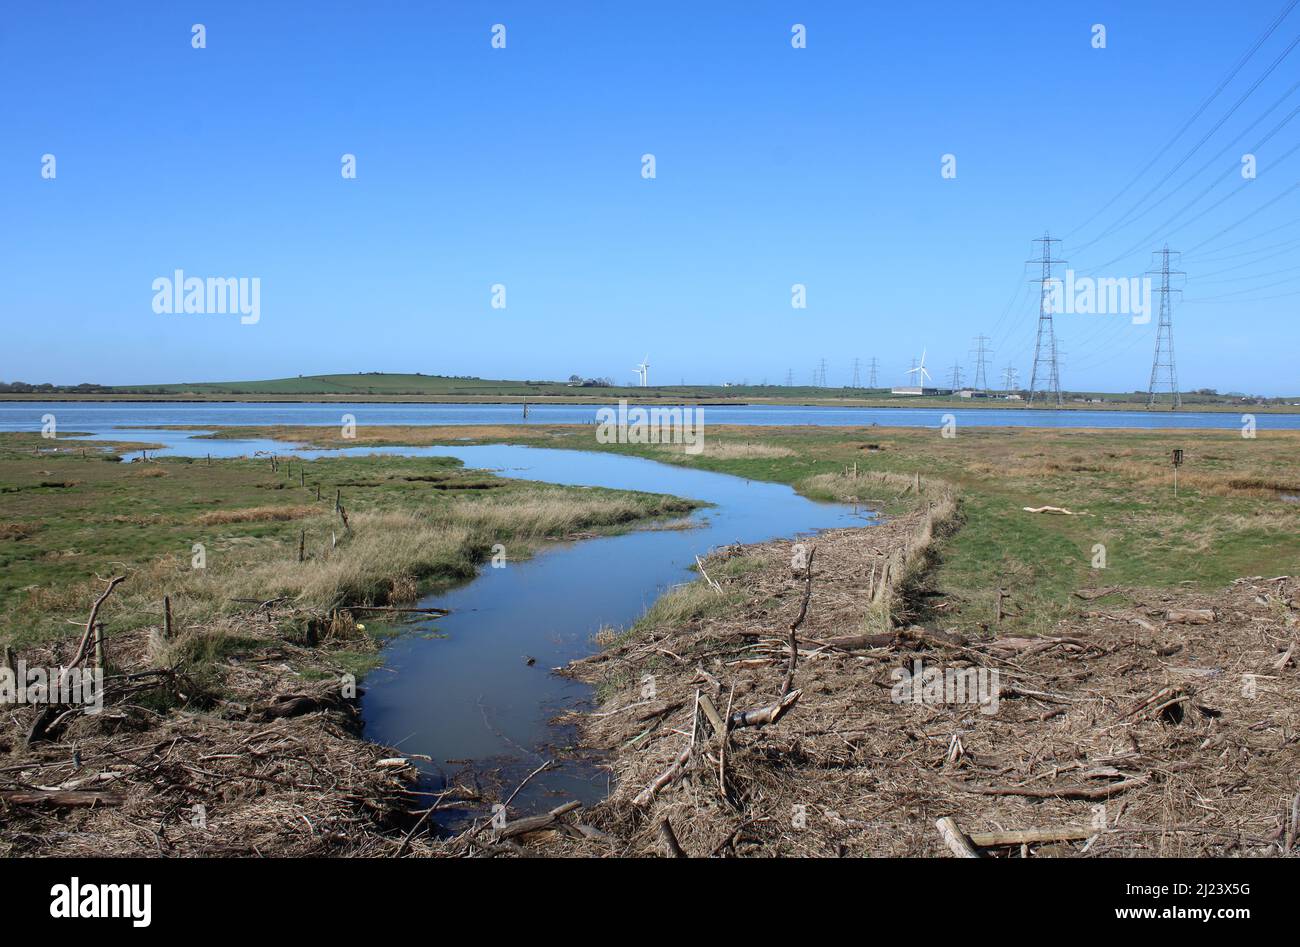 National grid electricity transmission power lines and pylons crossing the River Lune at Stodday near Lancaster with high tide in the river. Stock Photo